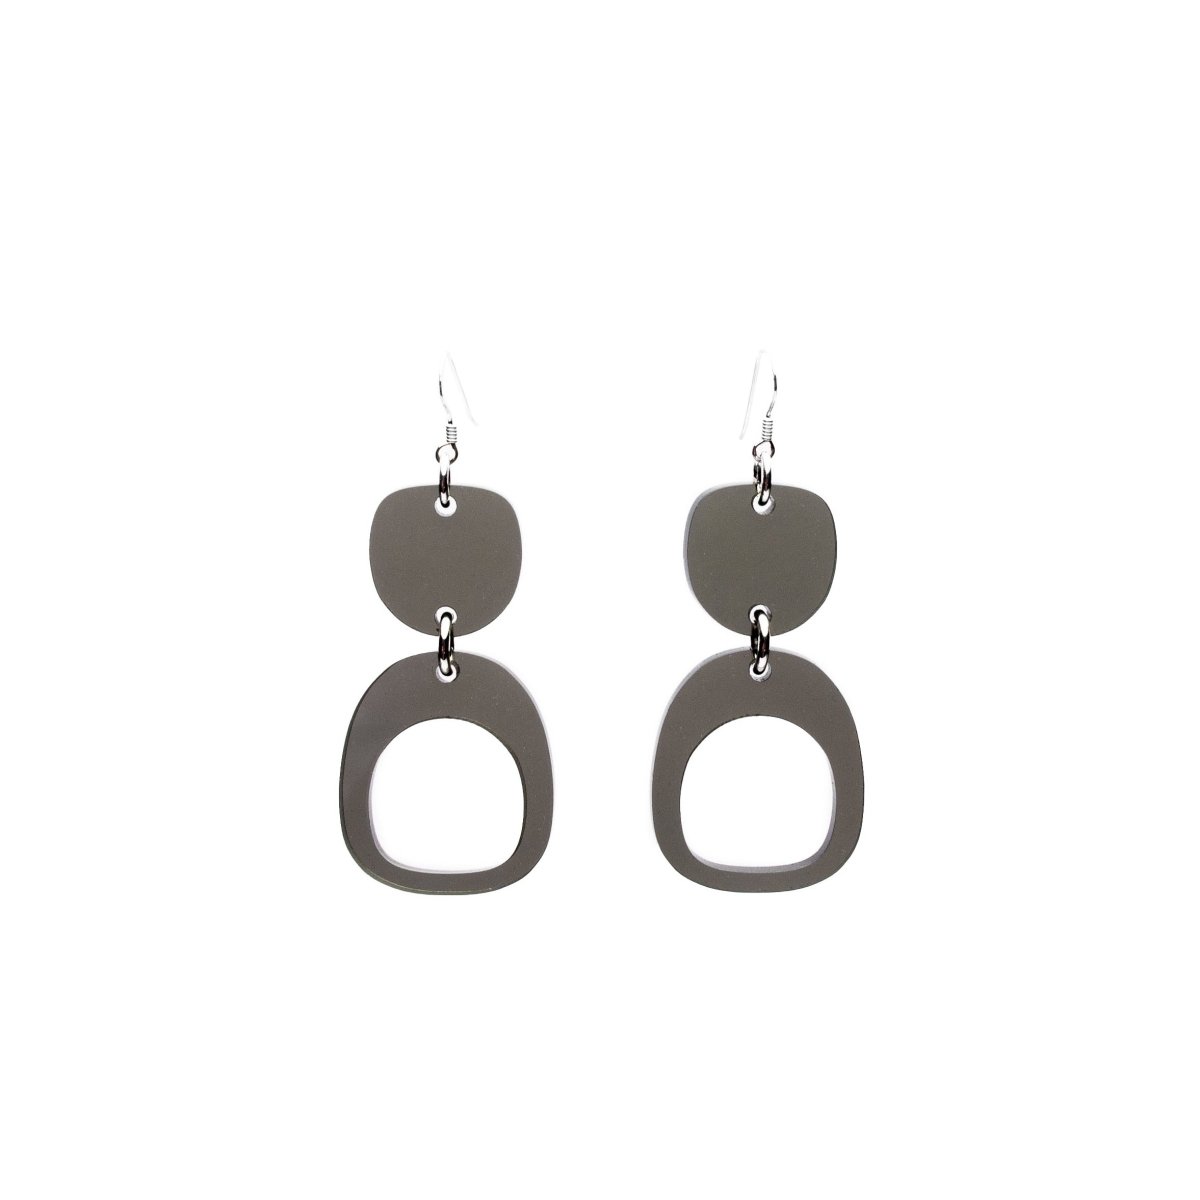 Two acrylic ovoids come together with sterling silver rings and sterling silver ear wires. The Ovoid Mini Earrings in Smoke are designed and handcrafted by Warren Steven Scott in Canada.